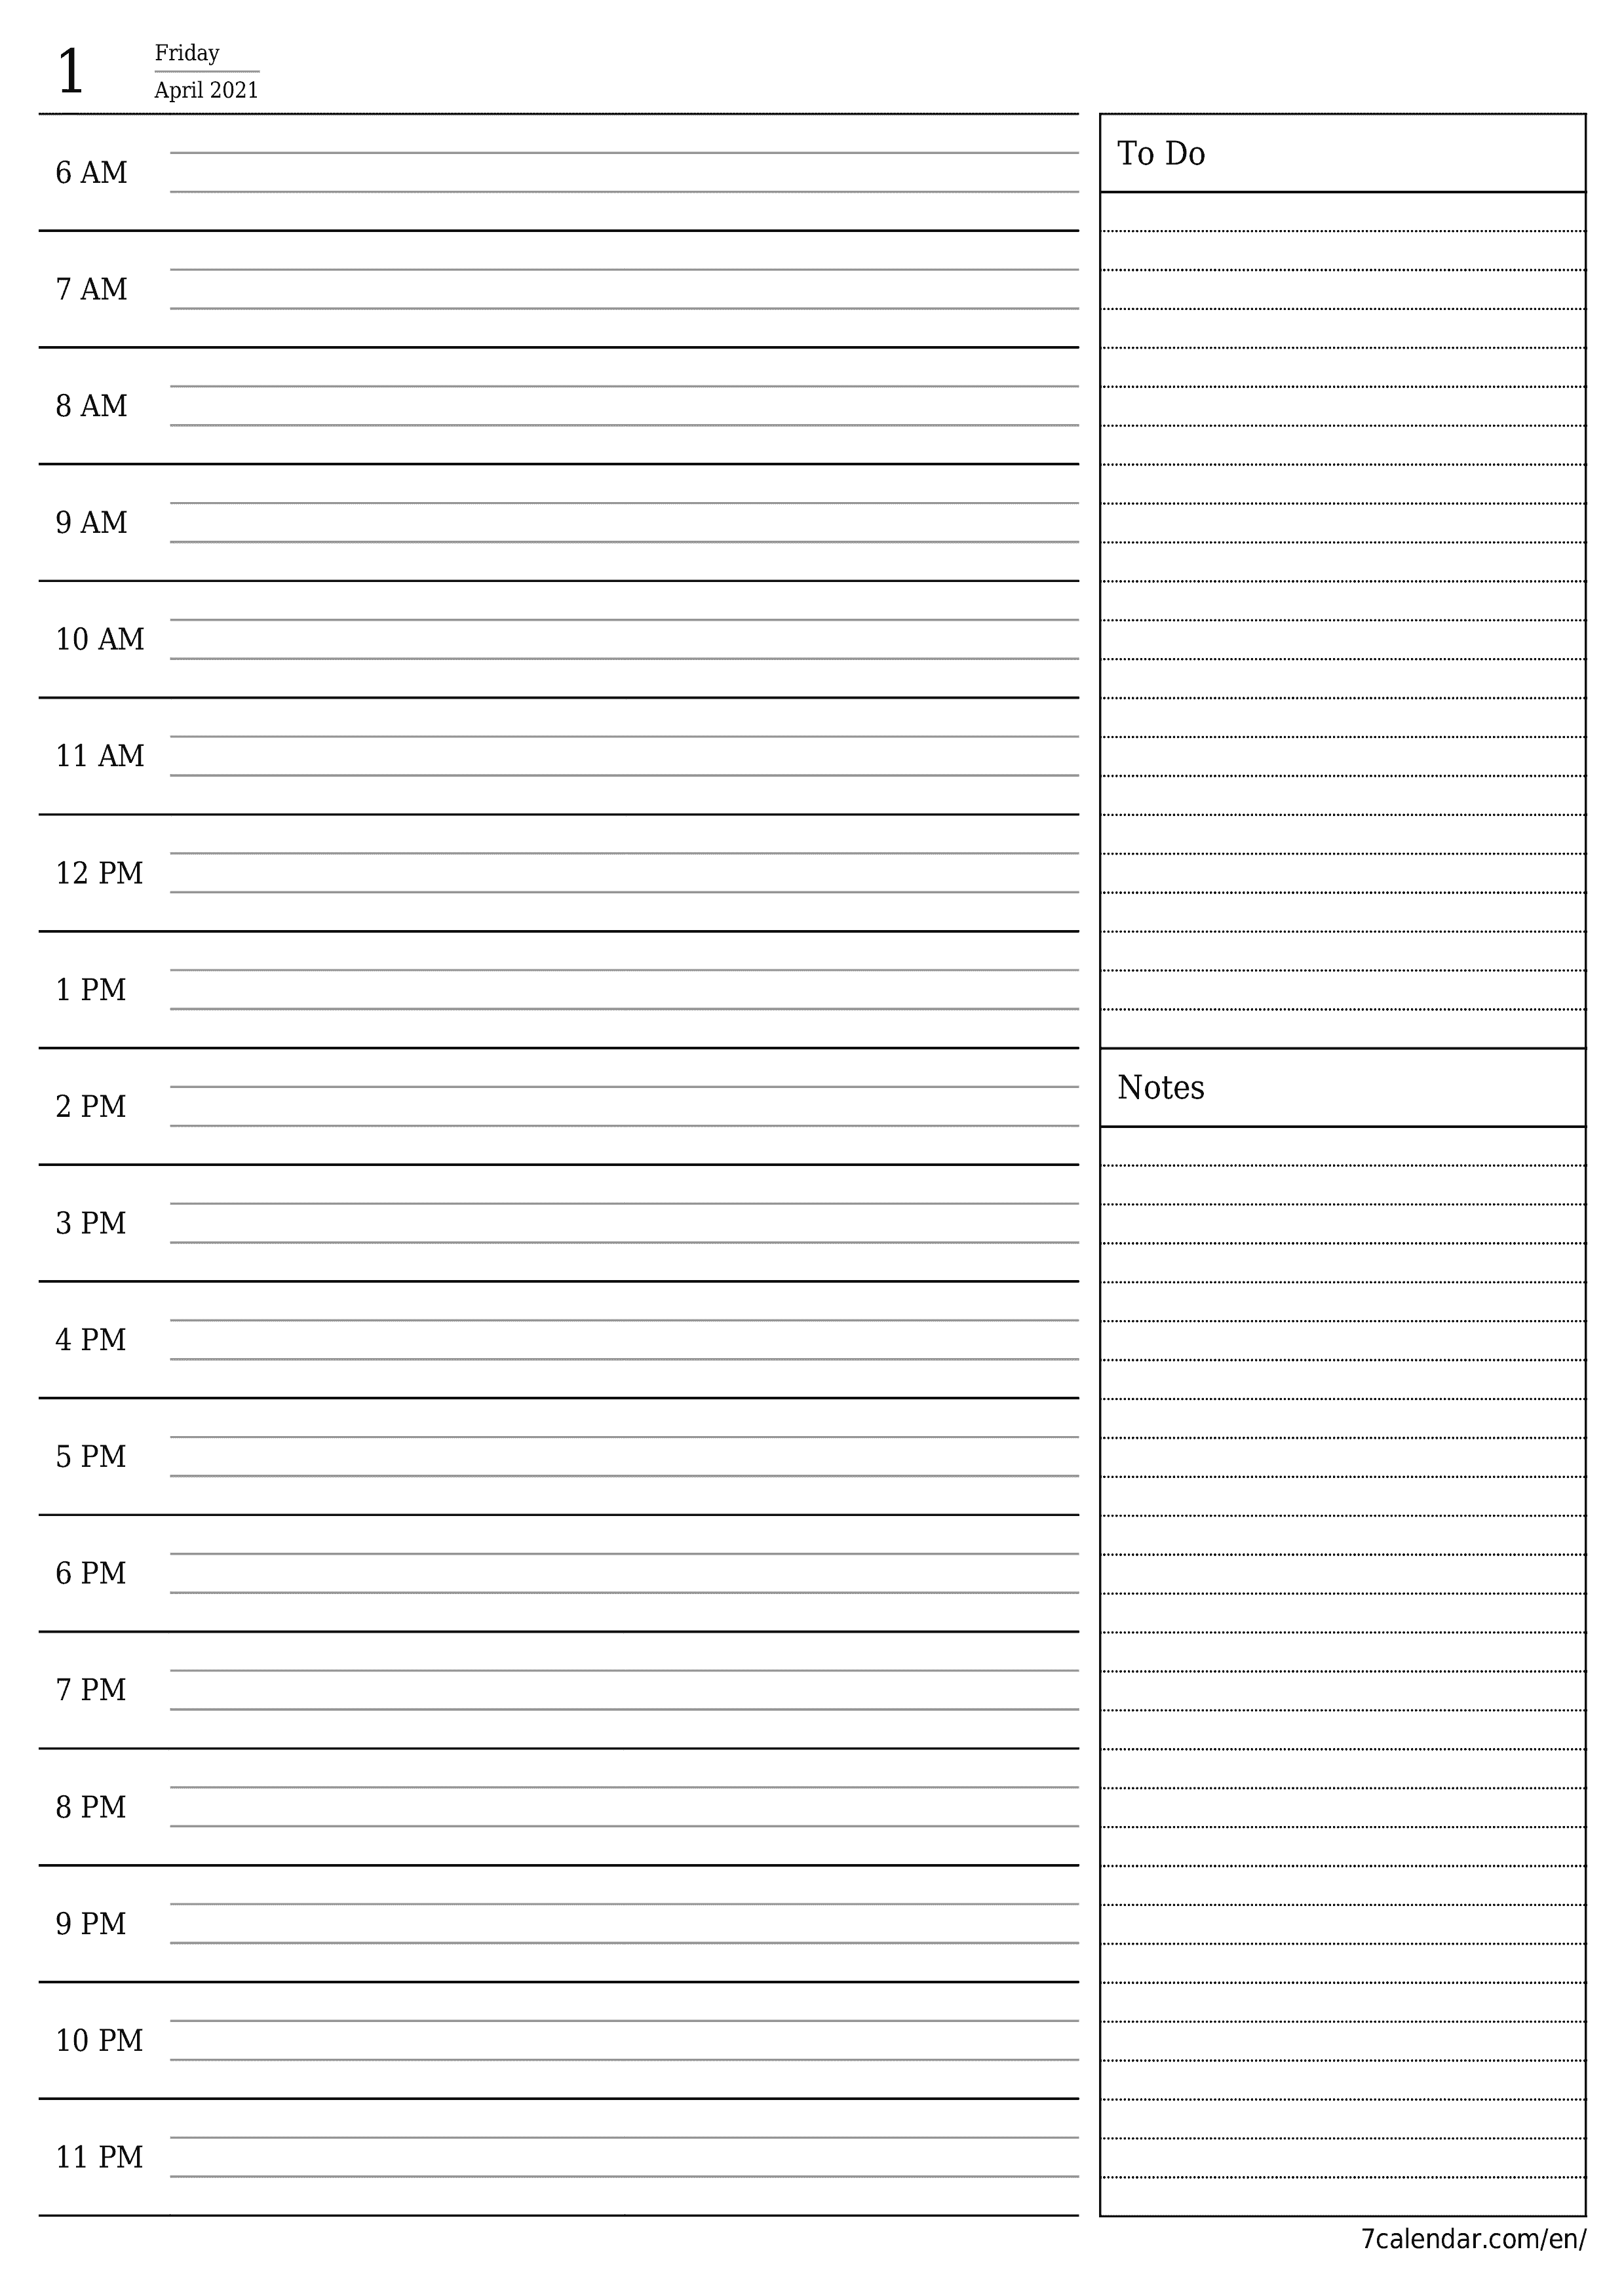 printable wall template free vertical Daily planner calendar April (Apr) 2021